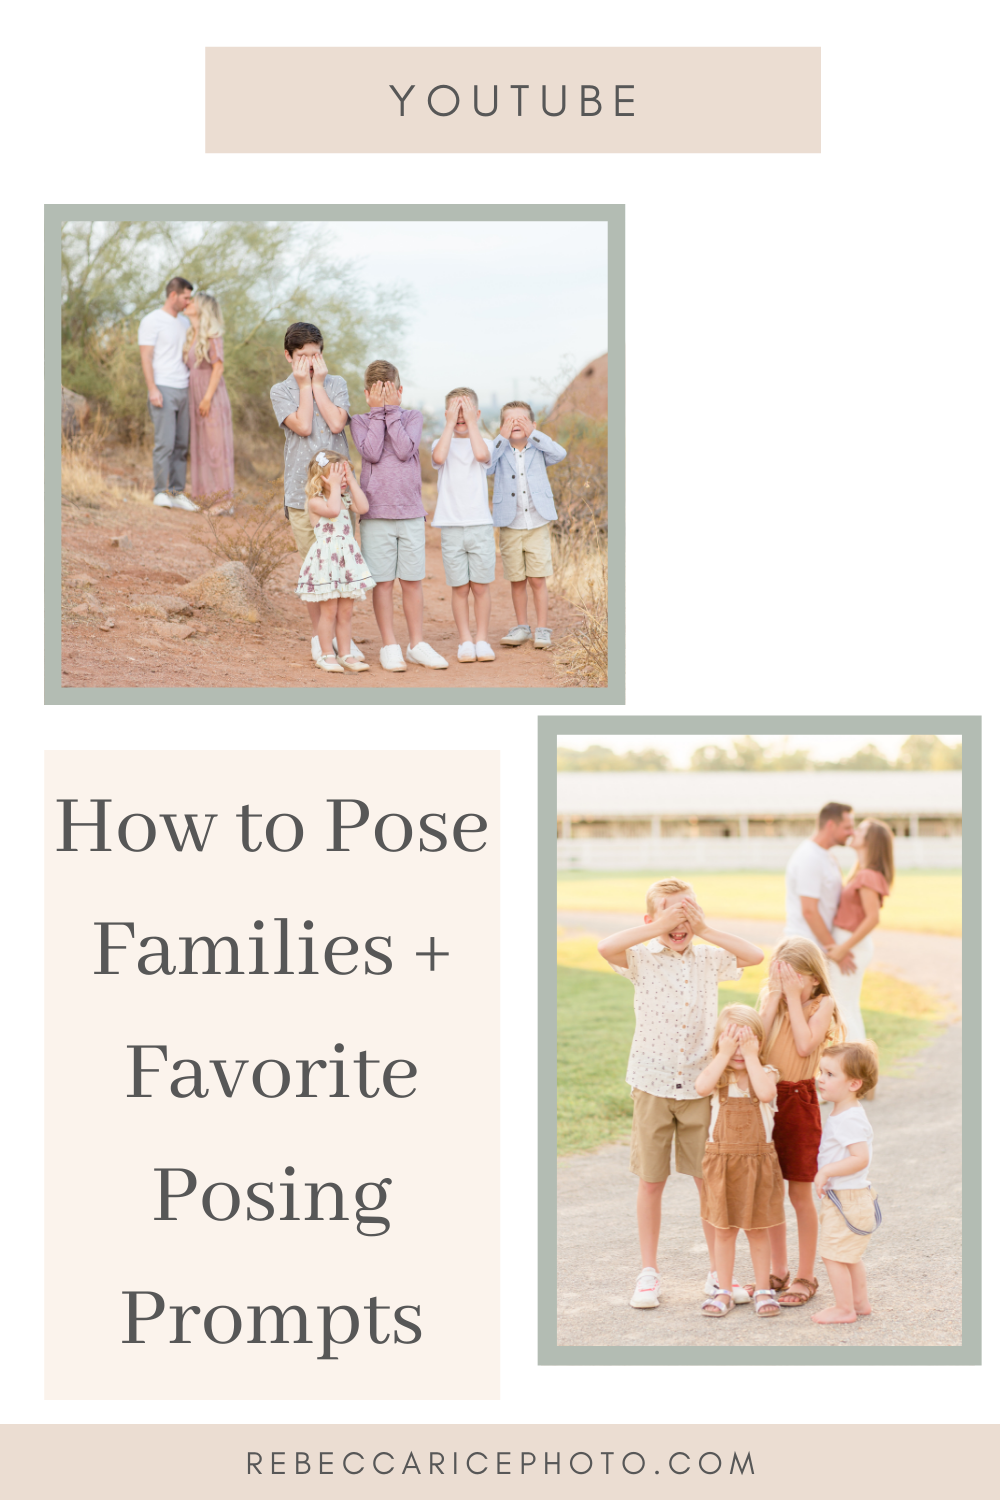 youtube video showing how to pose families during a photoshoot